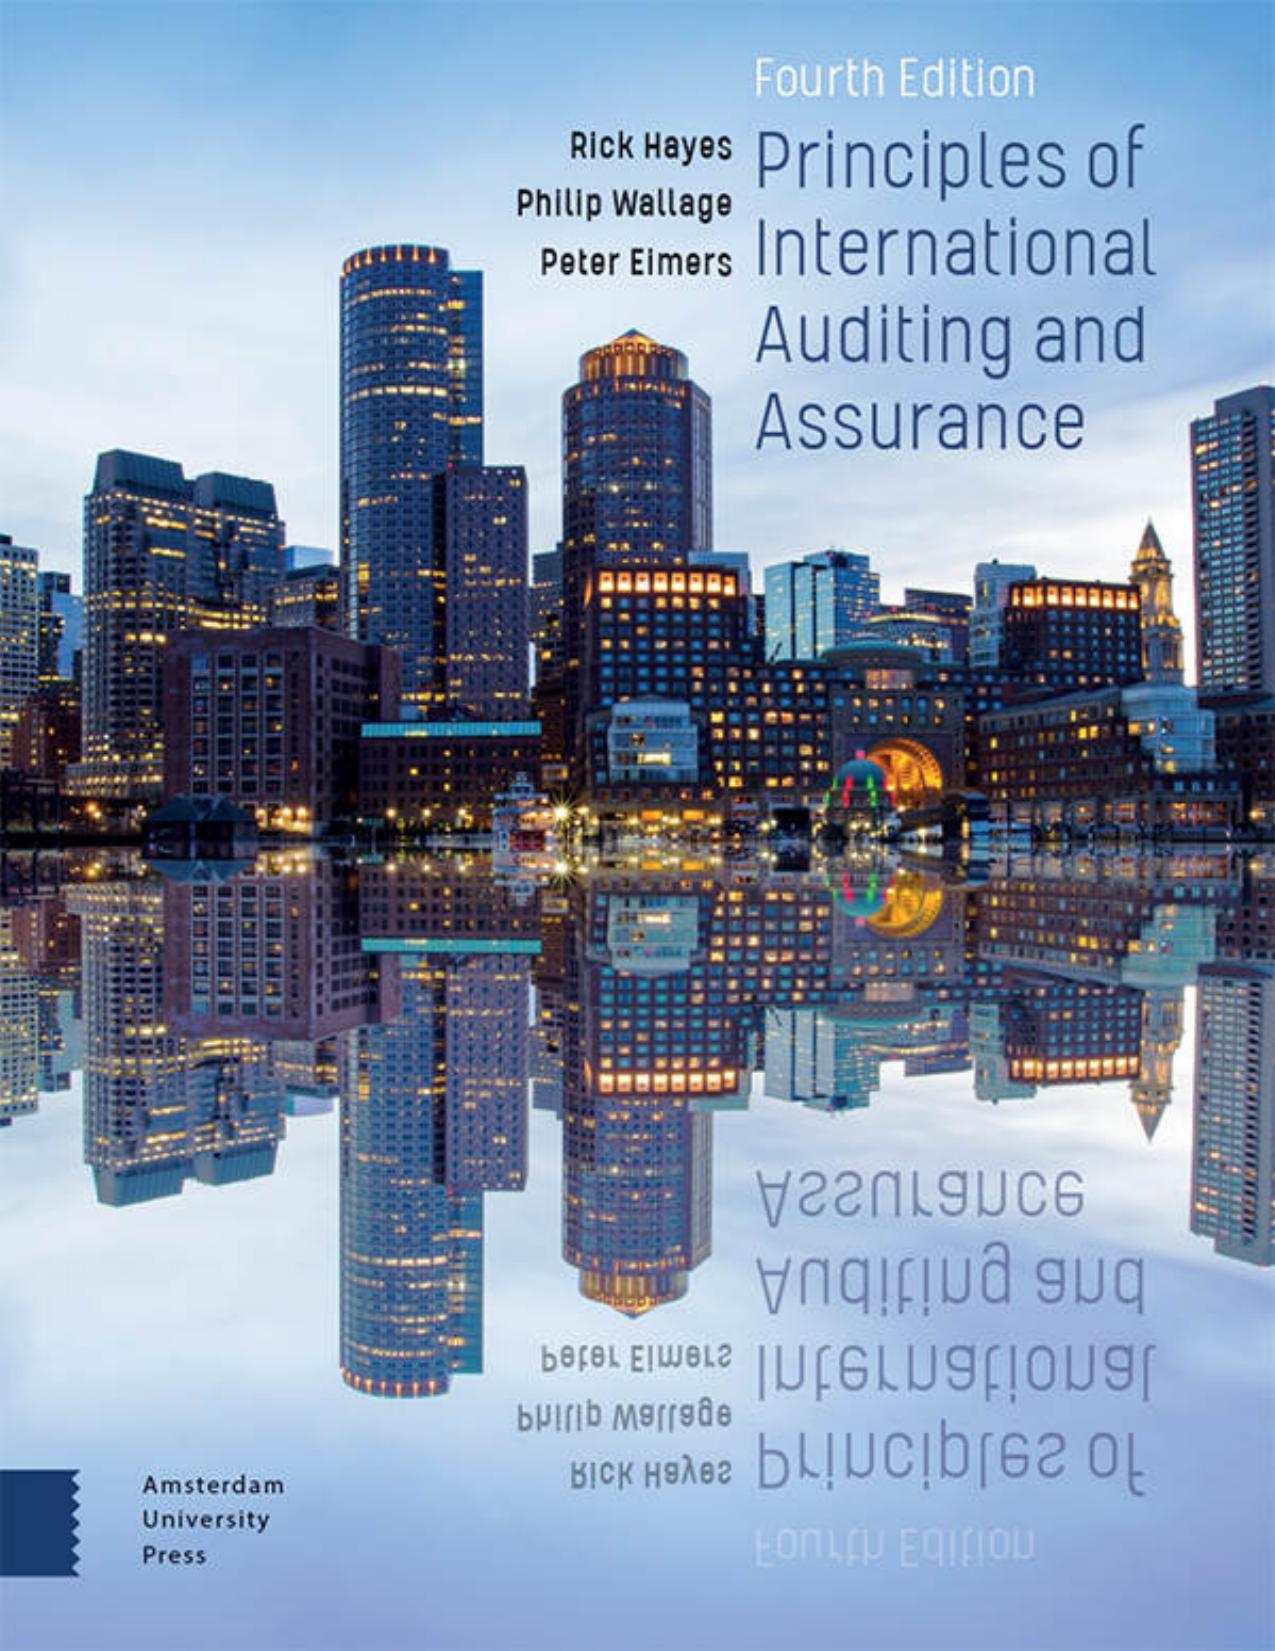 Principles of International Auditing and Assurance: 4th Edition by Rick Hayes , Philip Wallage , Peter Eimers